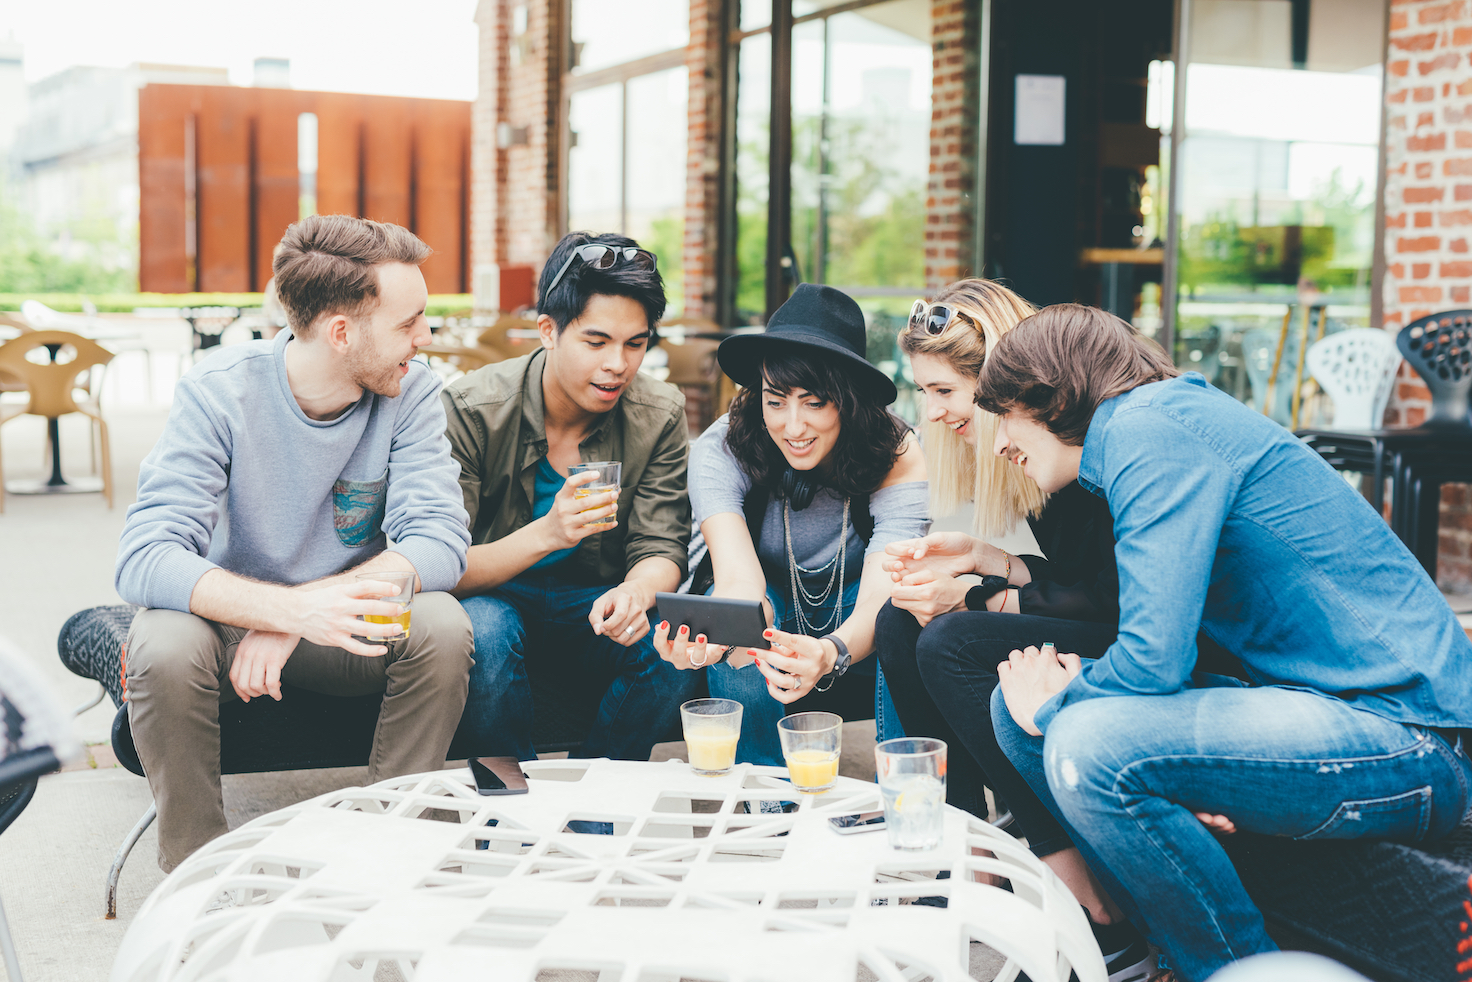 Group of friends millennials sitting outdoor in a bar using smart phone, having fun - interaction, togetherness, socializing concept